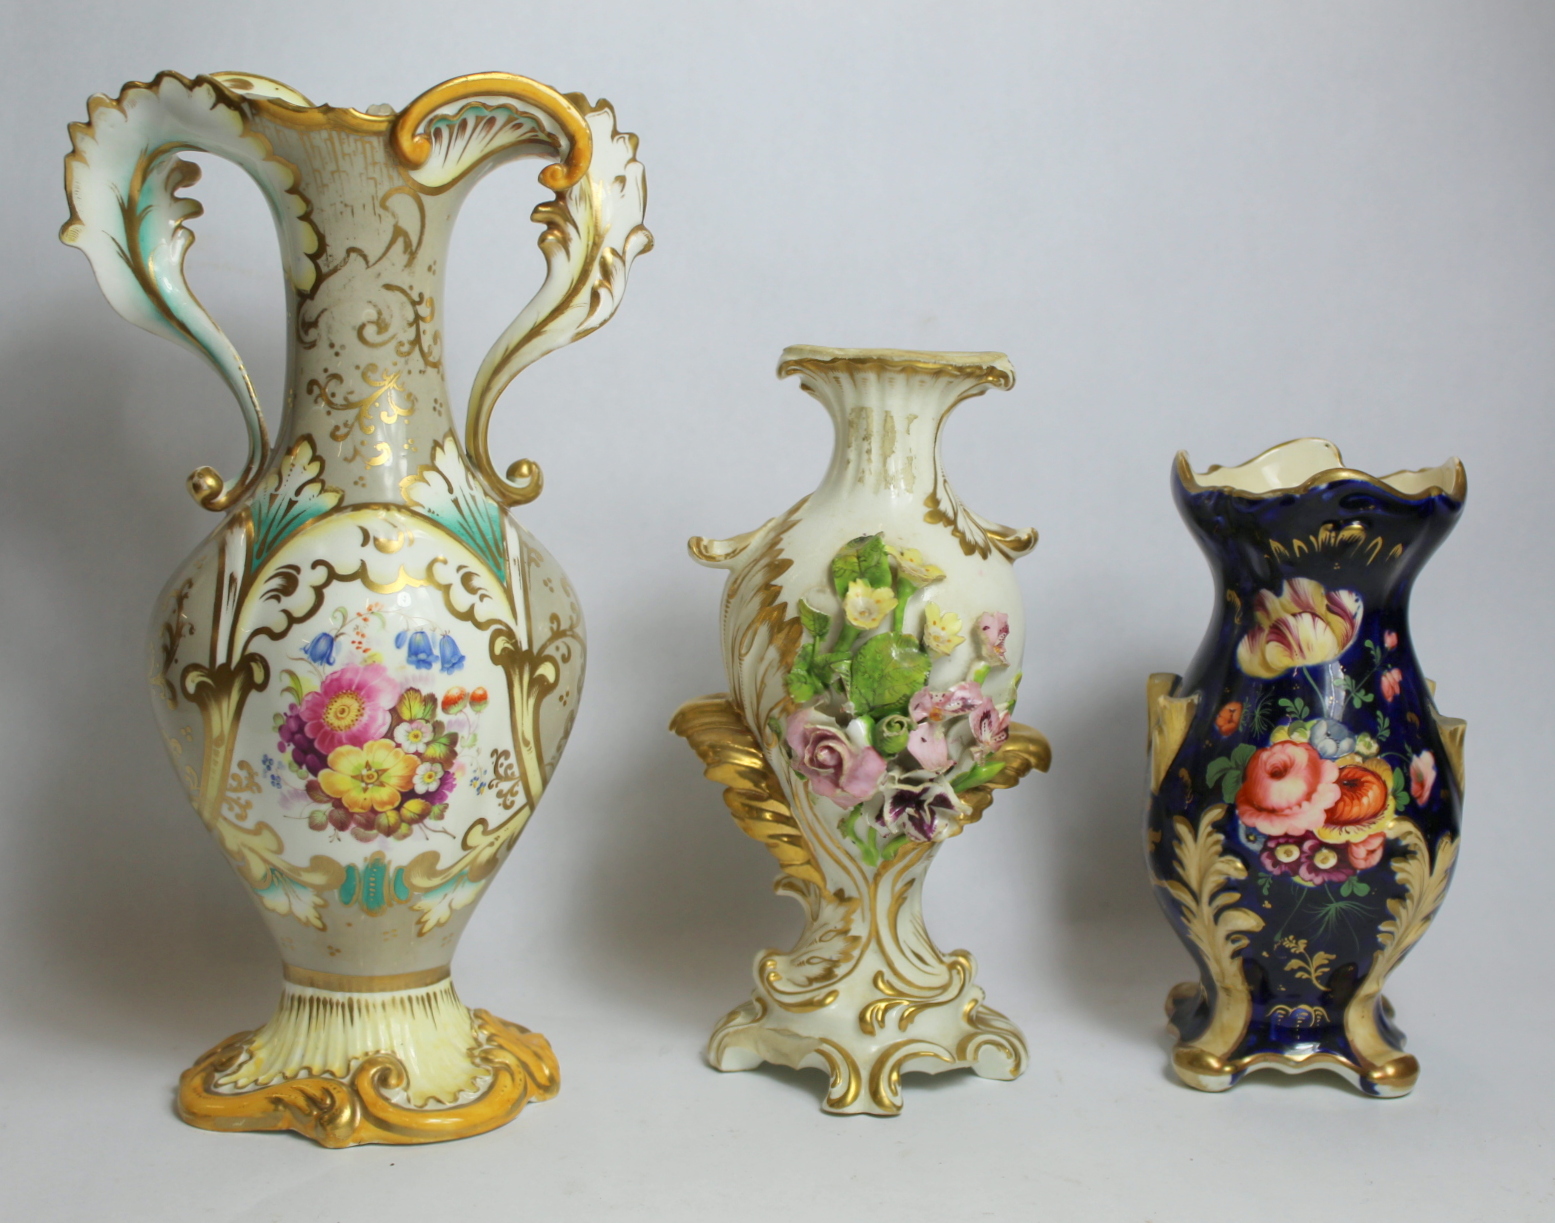 Early 19th century Derby porcelain vase with floral encrustation and moulded gilt foliate scrolling,